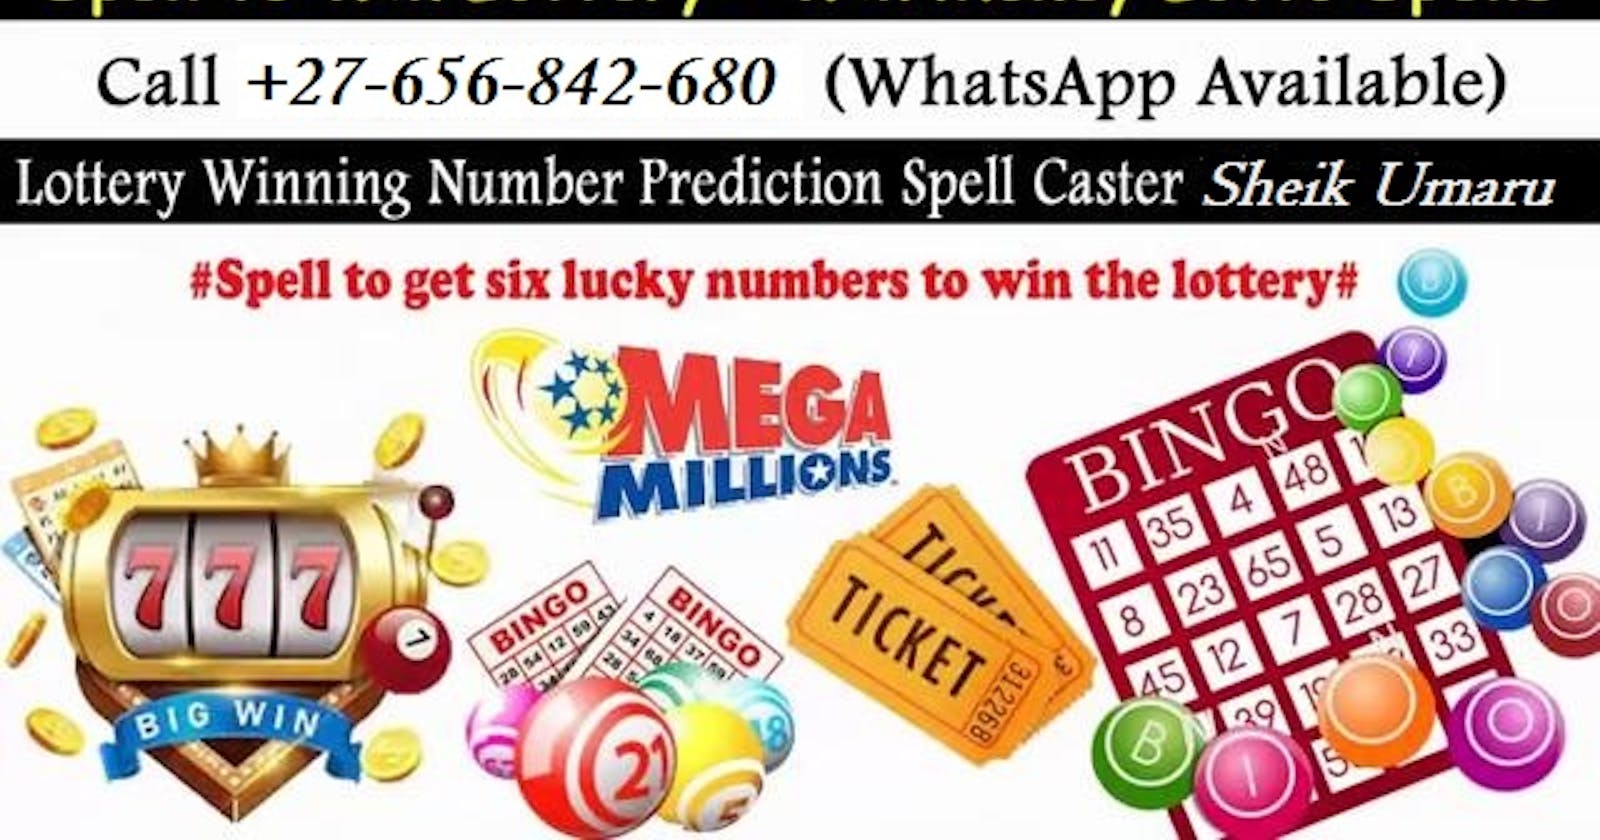 Spell To Win Lottery In USA And UK, Win Money Lotto Spells In Spain And Poland Call ☏+27656842680 Lottery Spells To Win The Jackpot In South Africa